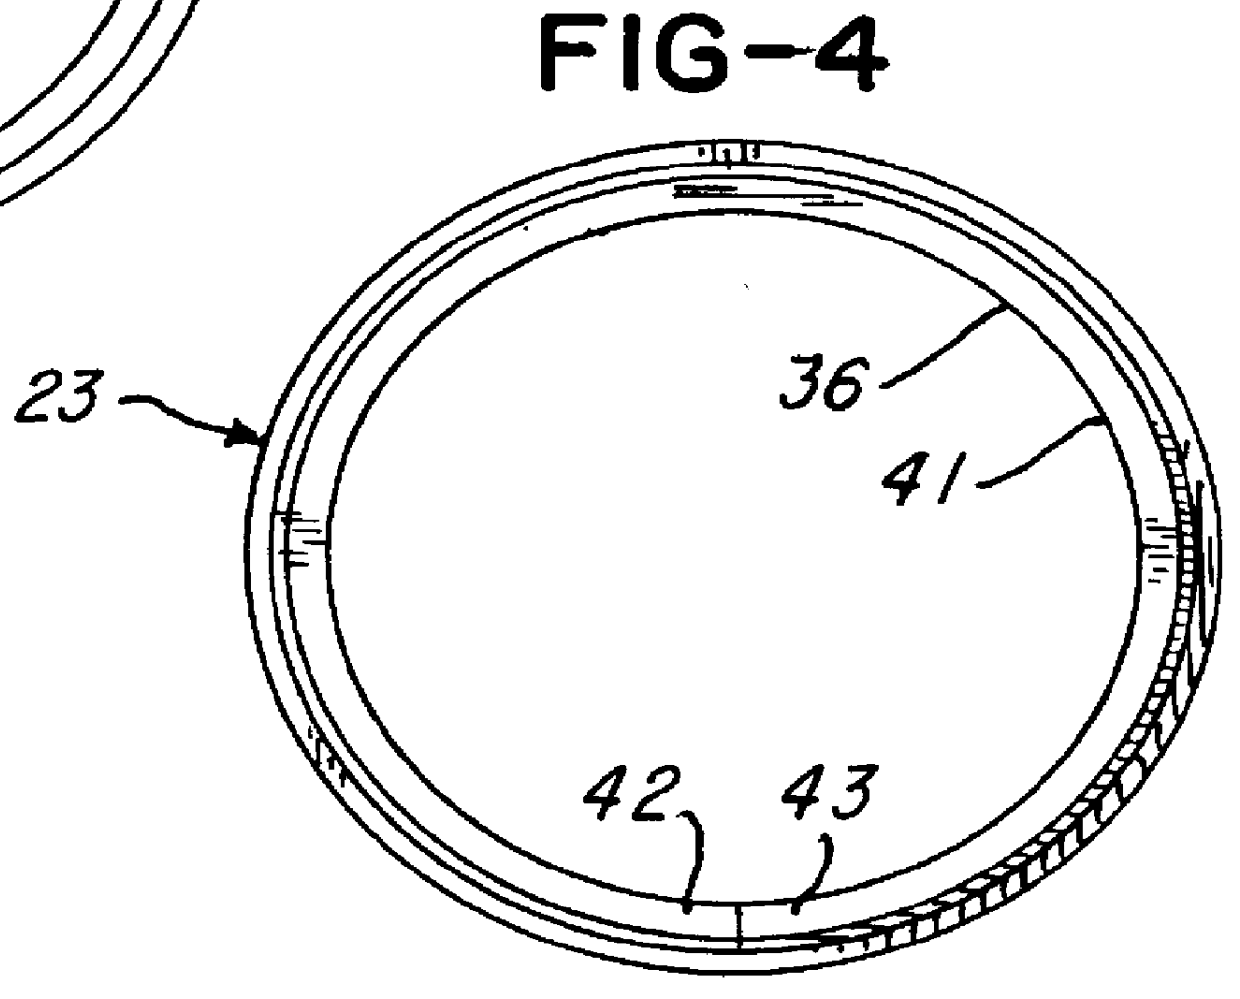 Suture ring for heart valve prosthesis